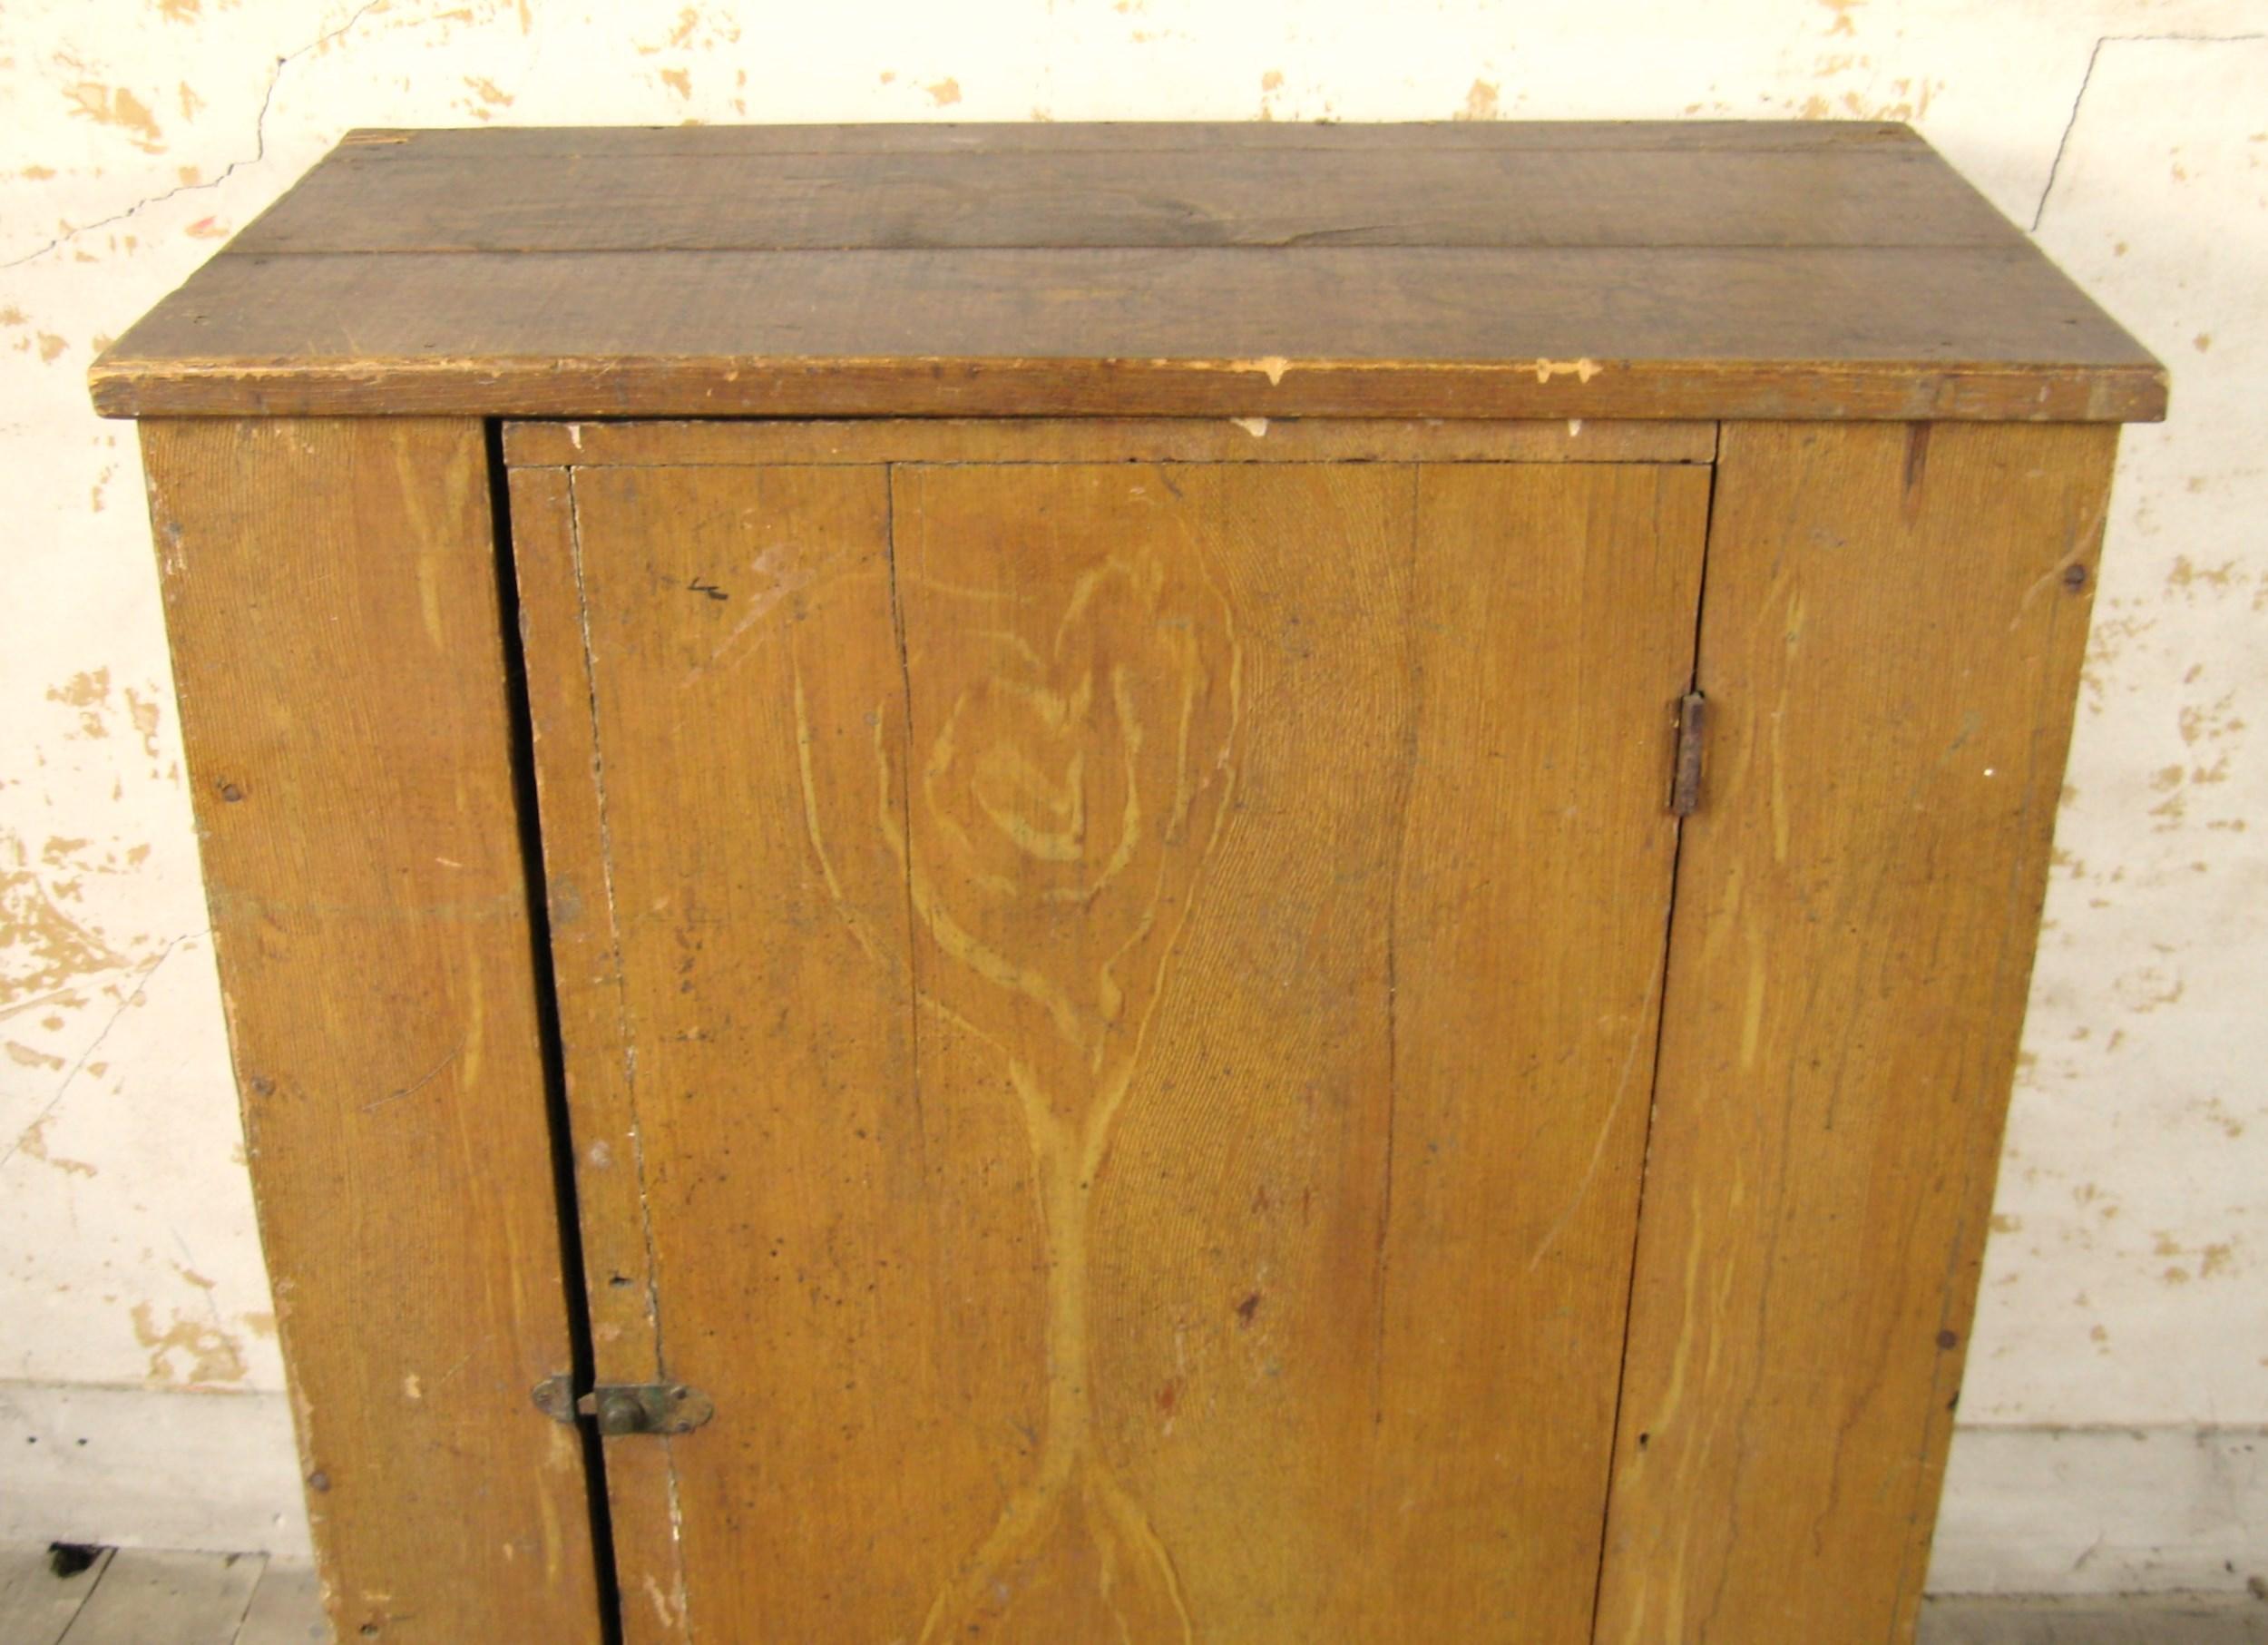 This Antique Primitive Farm 1 Door blind Cupboard from the 1850's is a rare find for collectors and enthusiasts of historical furniture. Its great Grain Painted Pennsylvania cupboard, Great Painting and wood material make it a unique addition to any